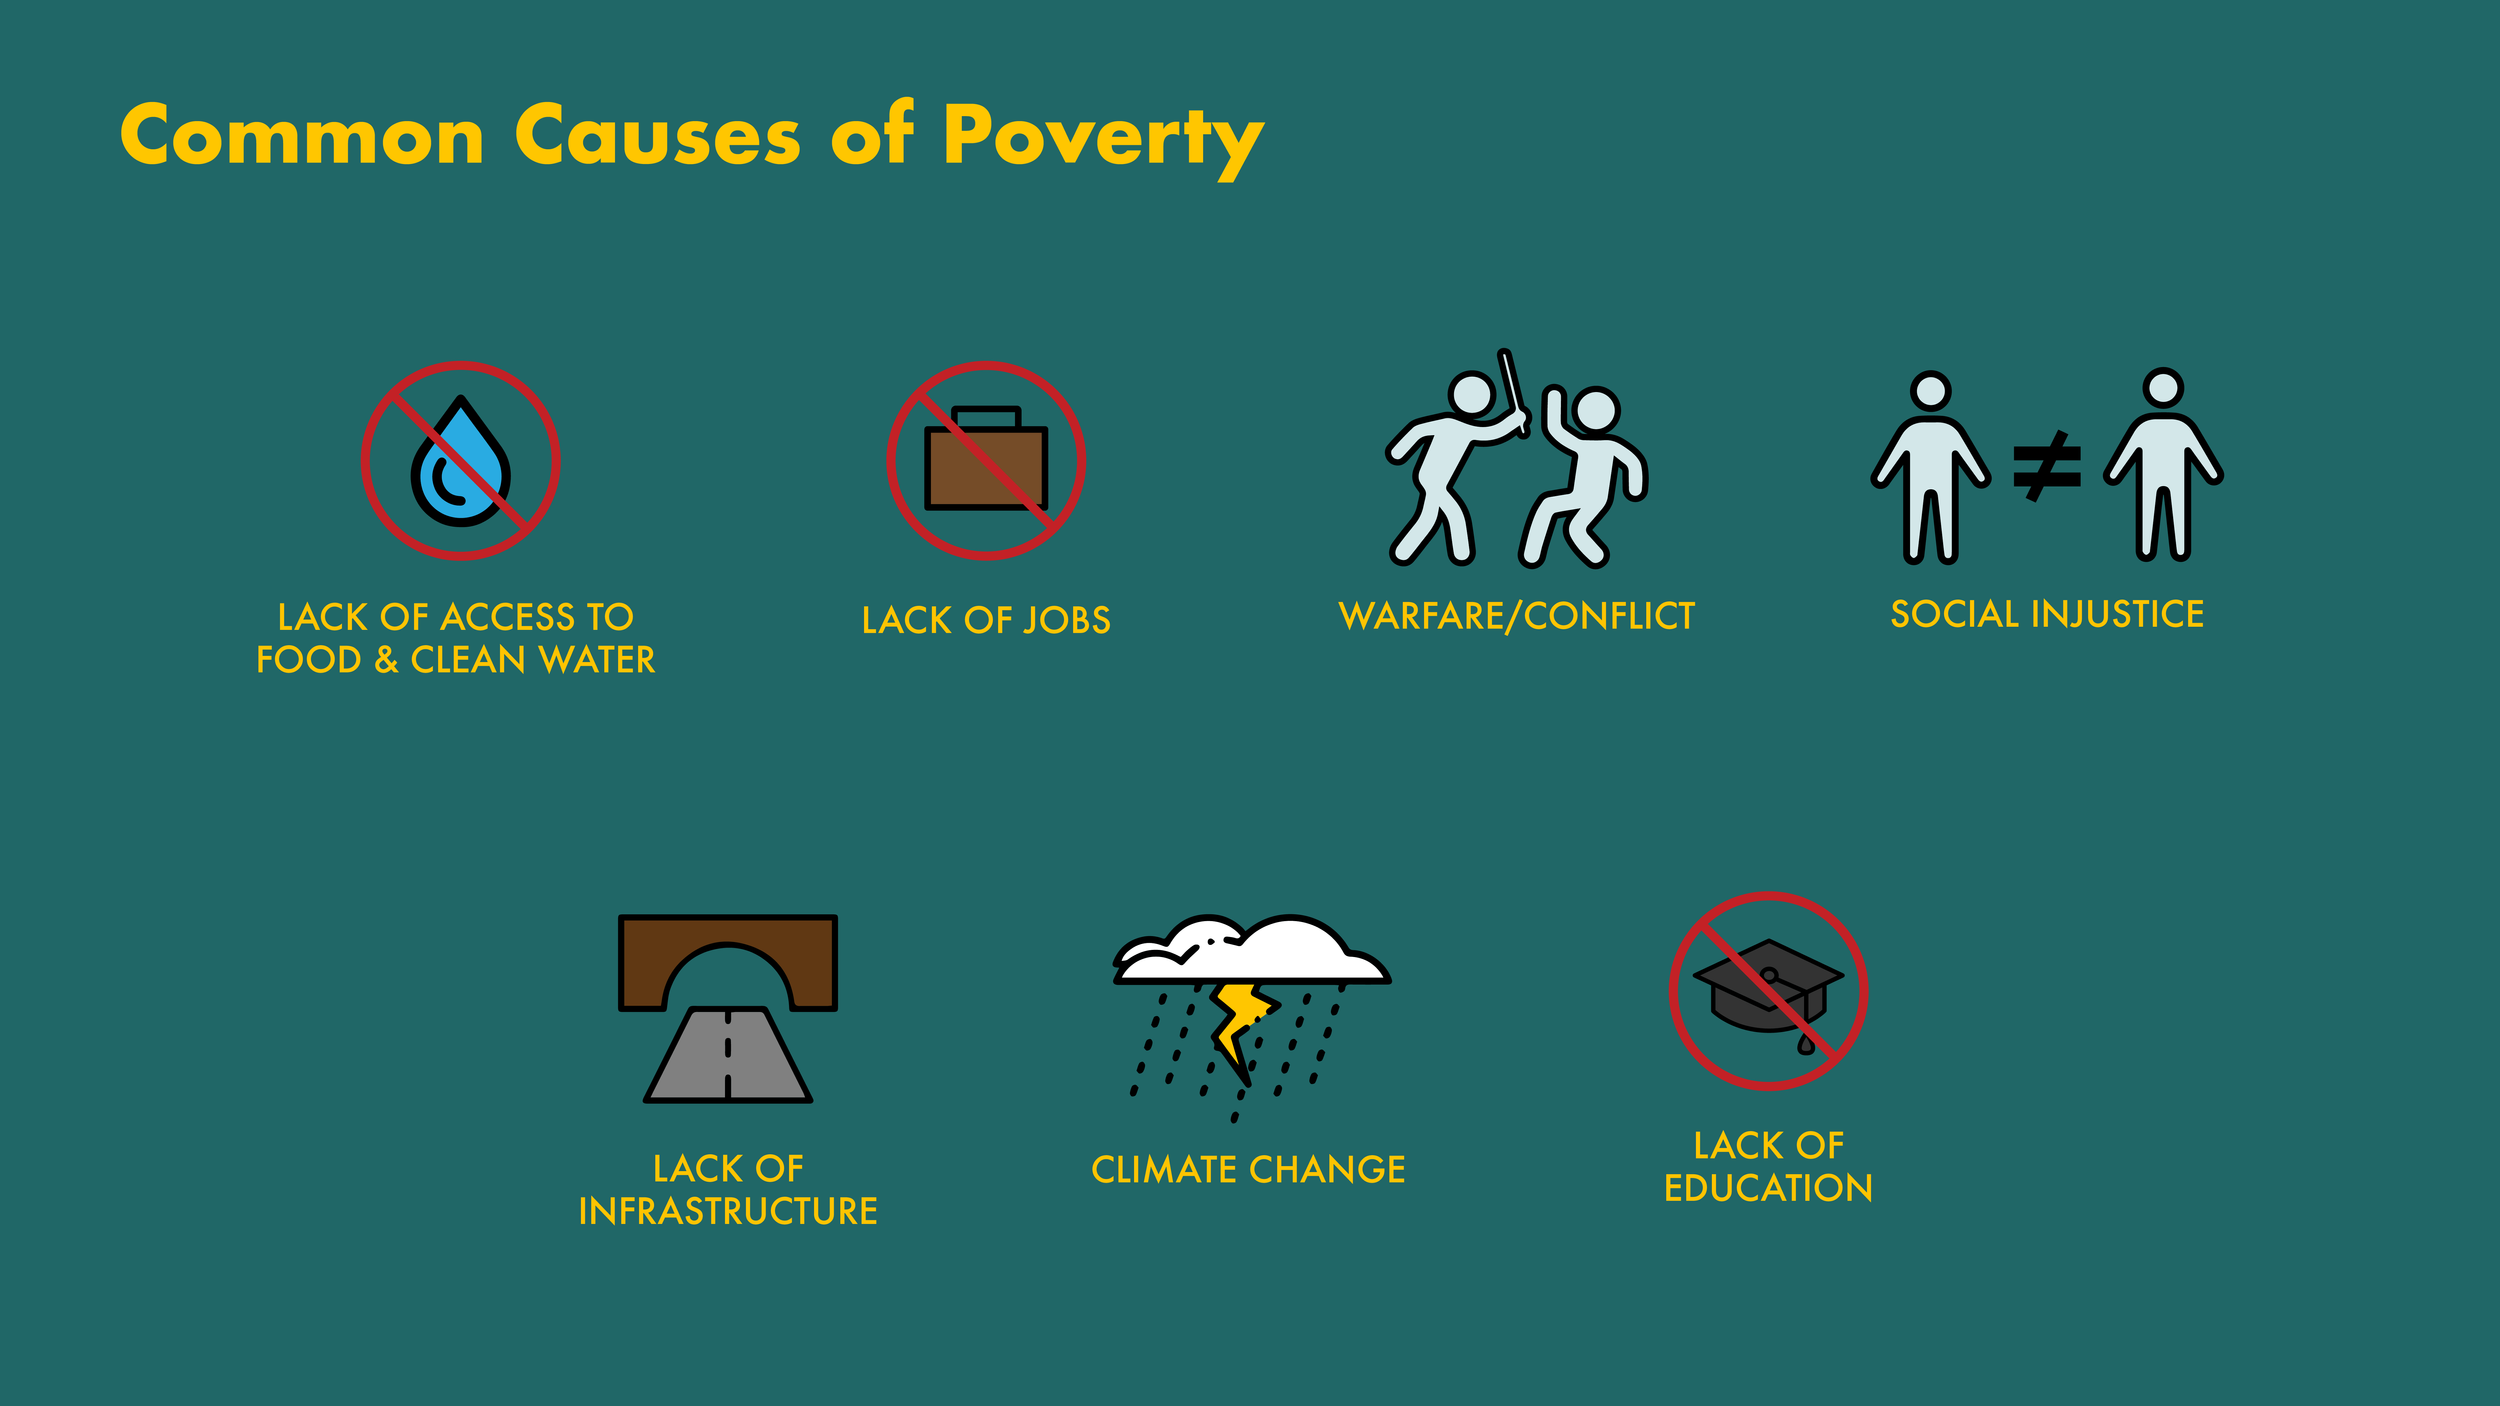 essay on root cause of poverty